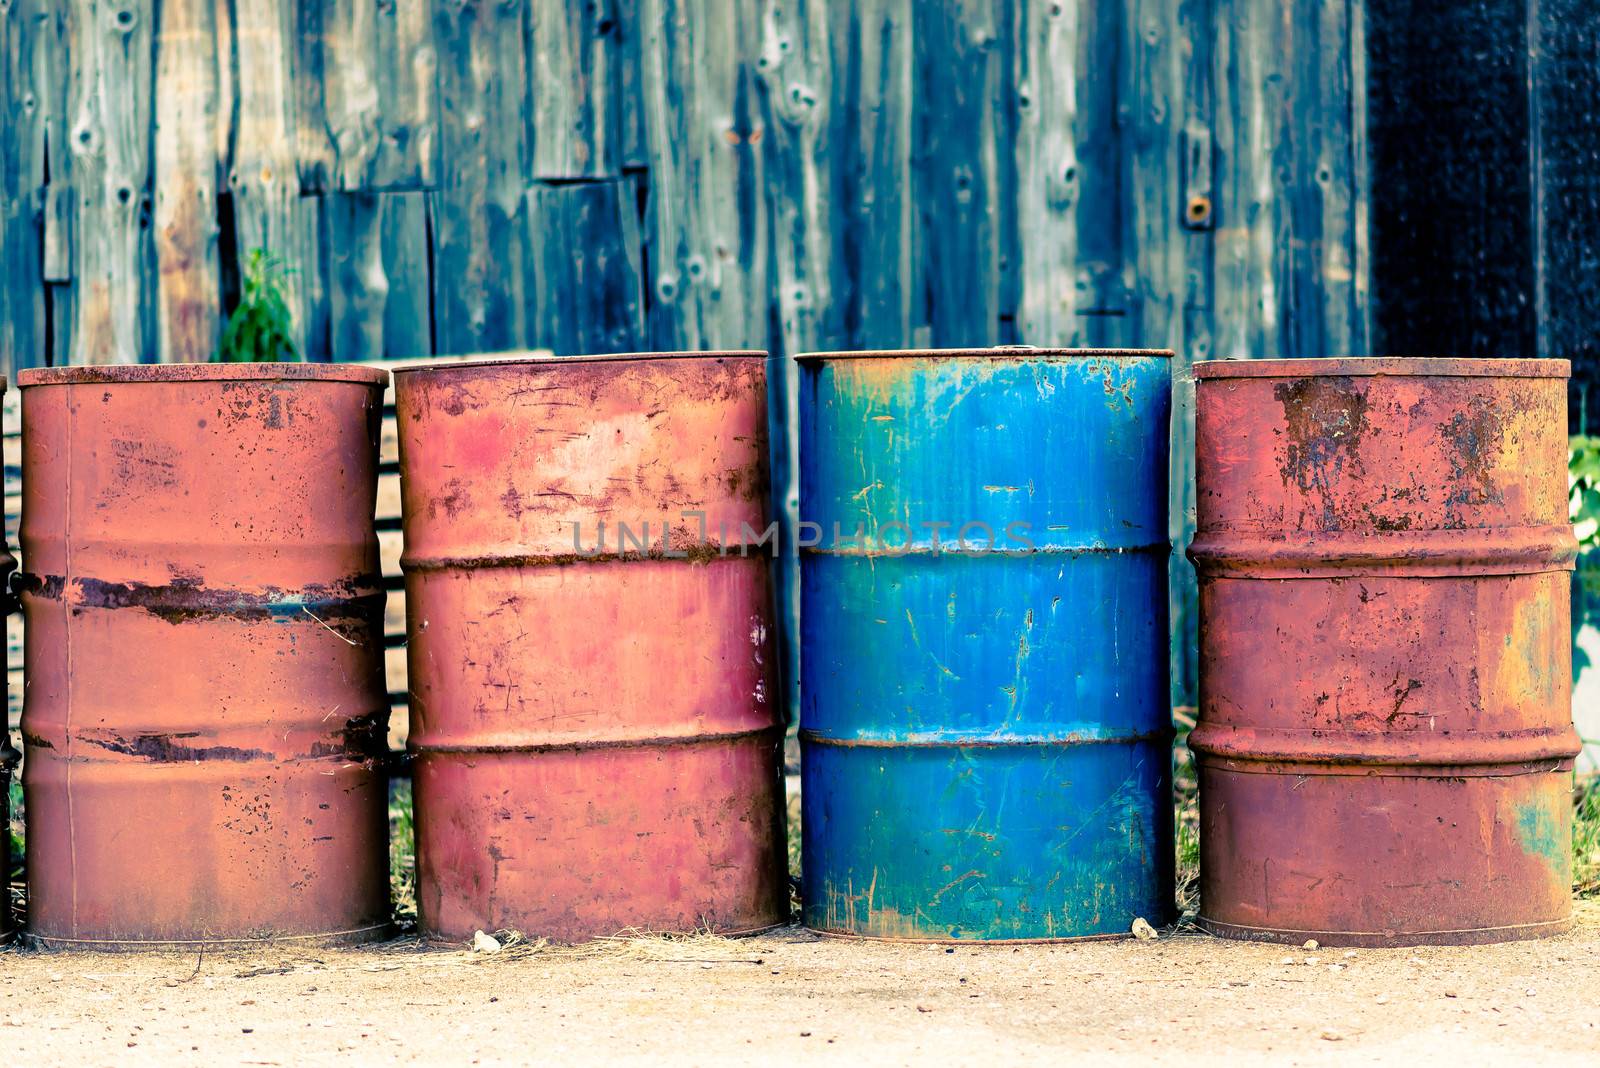 Photo presents four old used rust barrels for oil, petroleum, crude oil, mineral oil or petrol, three barrels are red and one is blue. In background visible wooden storehouse, warehouse.